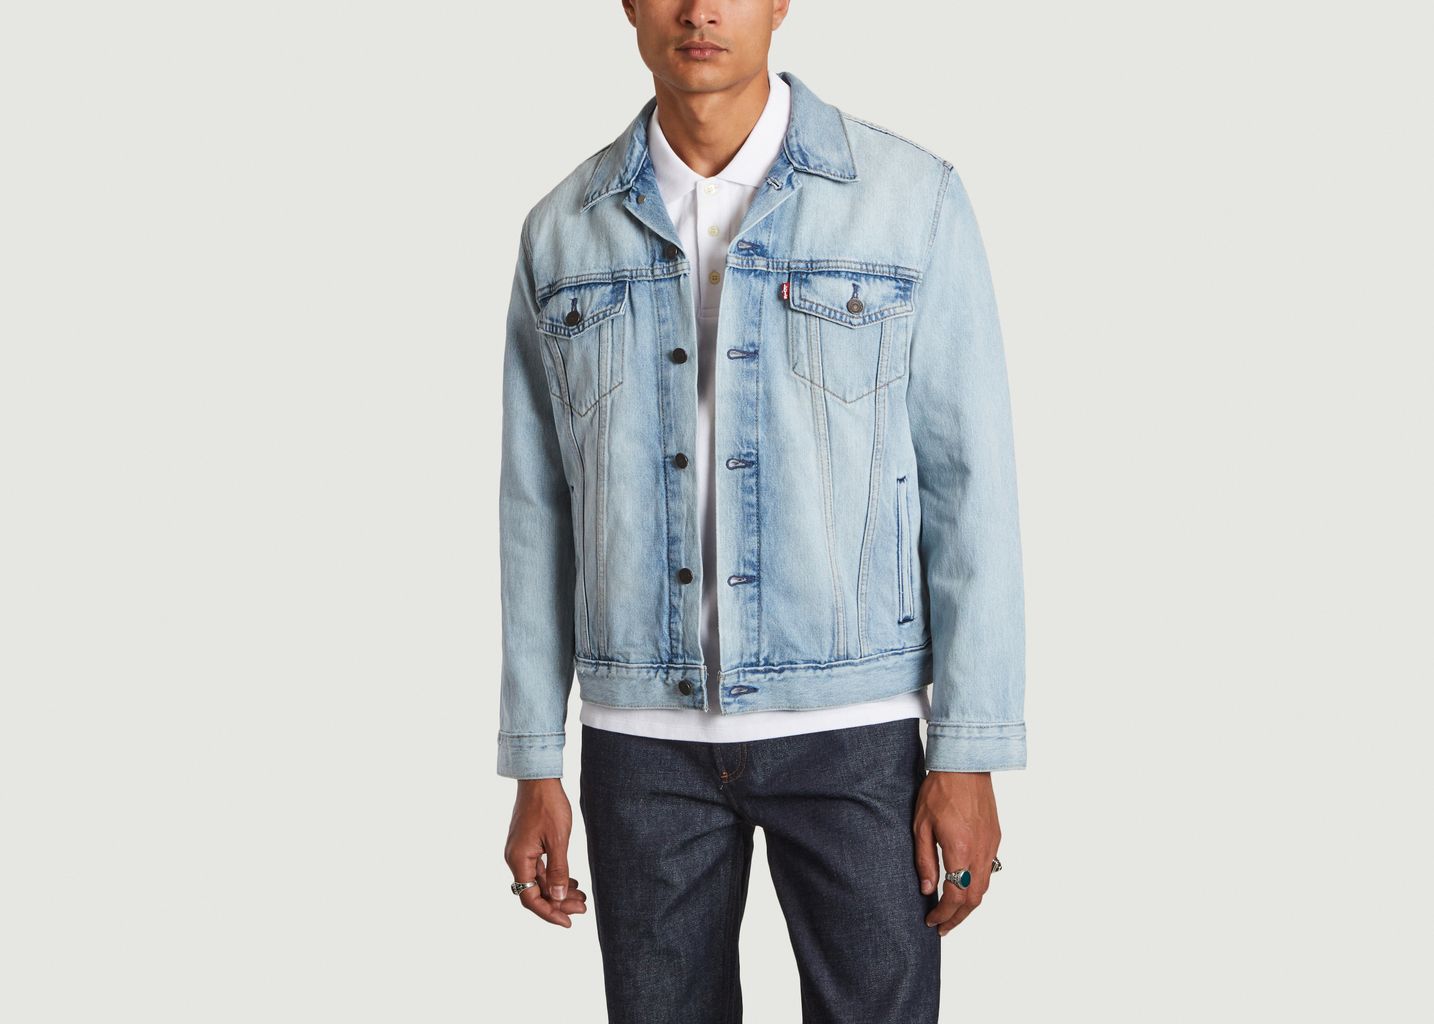 Washed denim jacket with straight cut Denim Levi's Red Tab | L'Exception